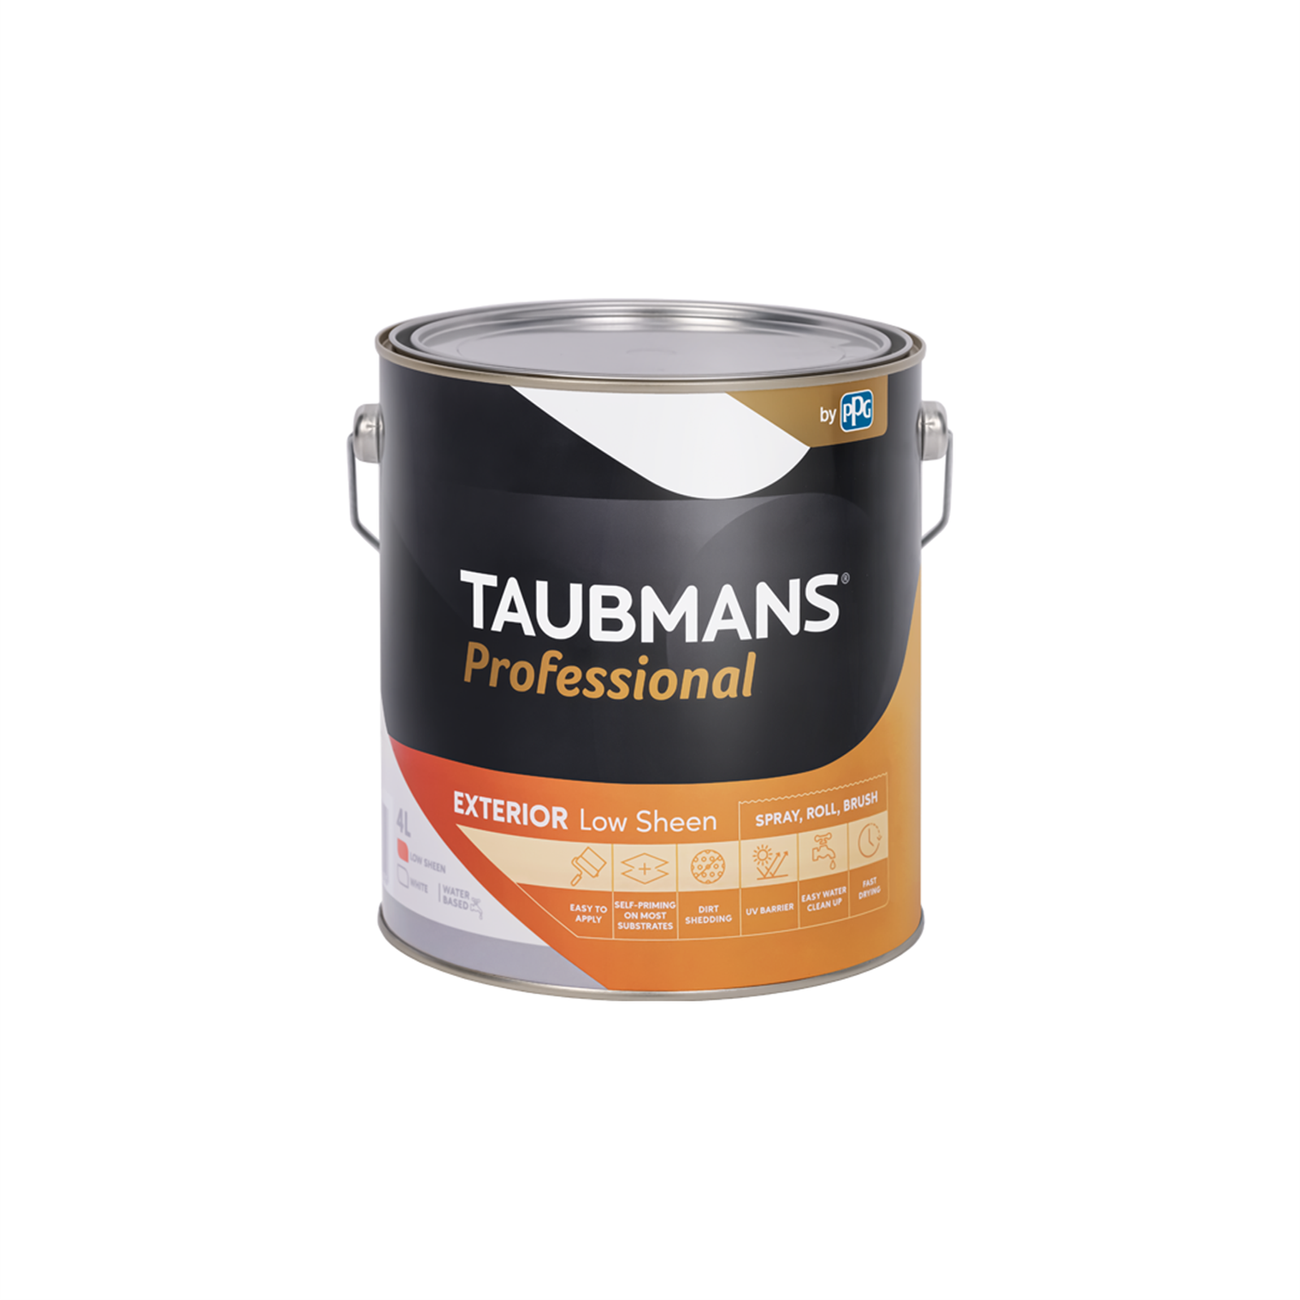 67% OFF of fixed price Taubmans Professional White Low Paint Sheen Exterior price